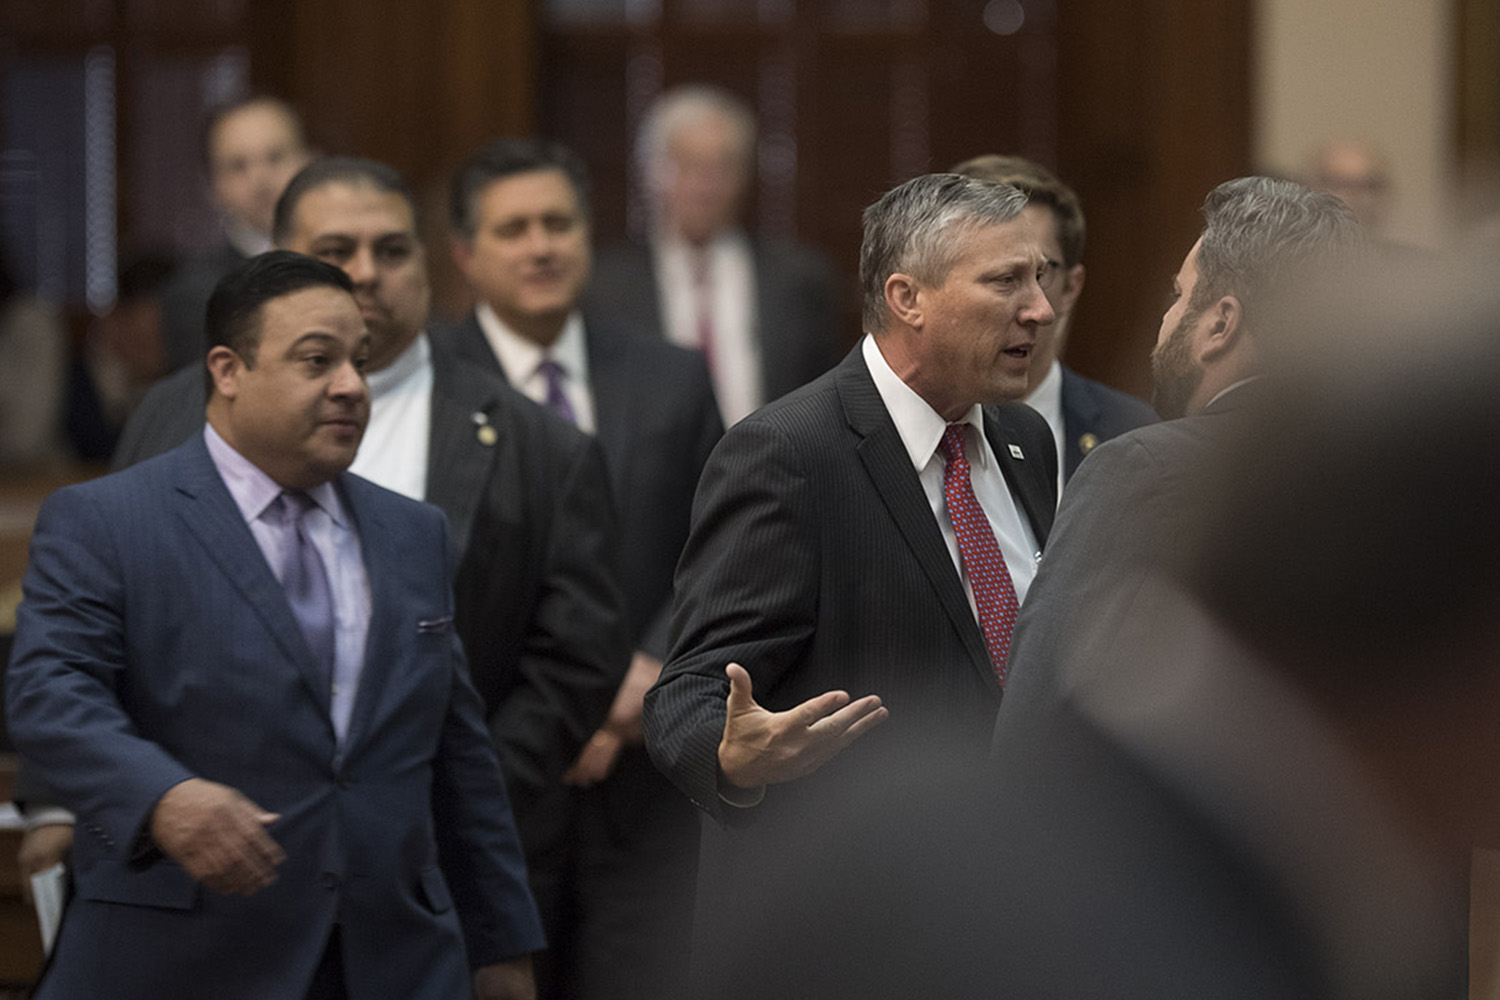 State Reps. Drew Springer, R-Muenster, and Jonathan Stickland, R-Bedford, in a heated exchange over a feral hog amendment to the House budget on April 6, 2017.